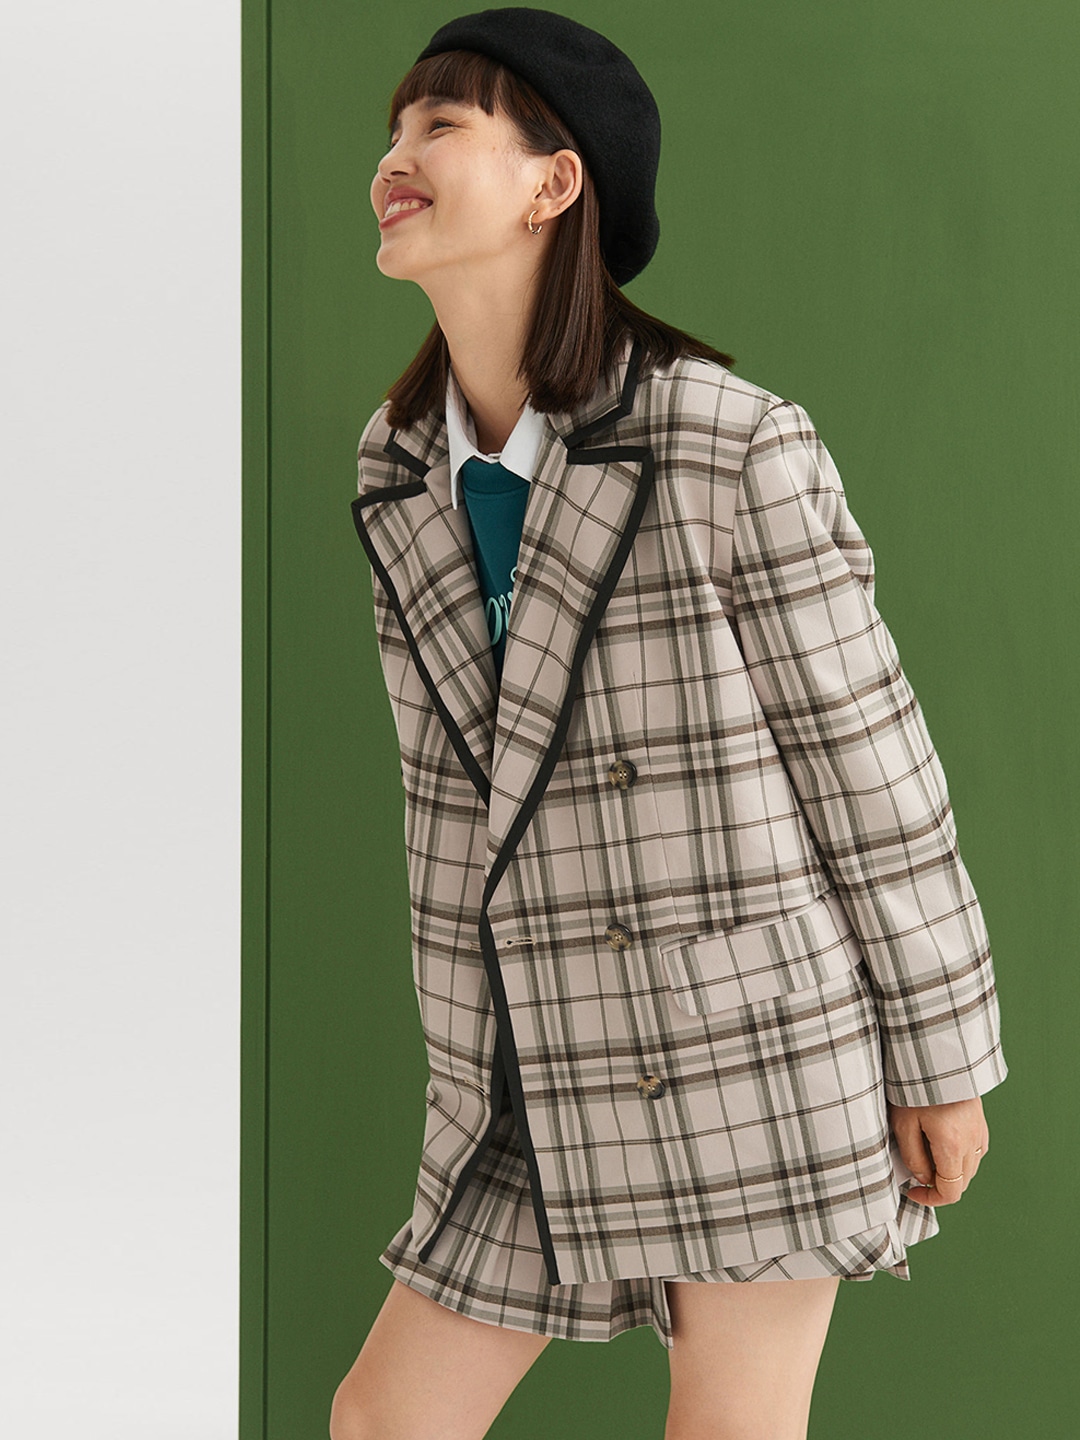 Clothing Blazers | H&M Women Beige & Brown Checked Double-Breasted Oversized Jacket - BU91366